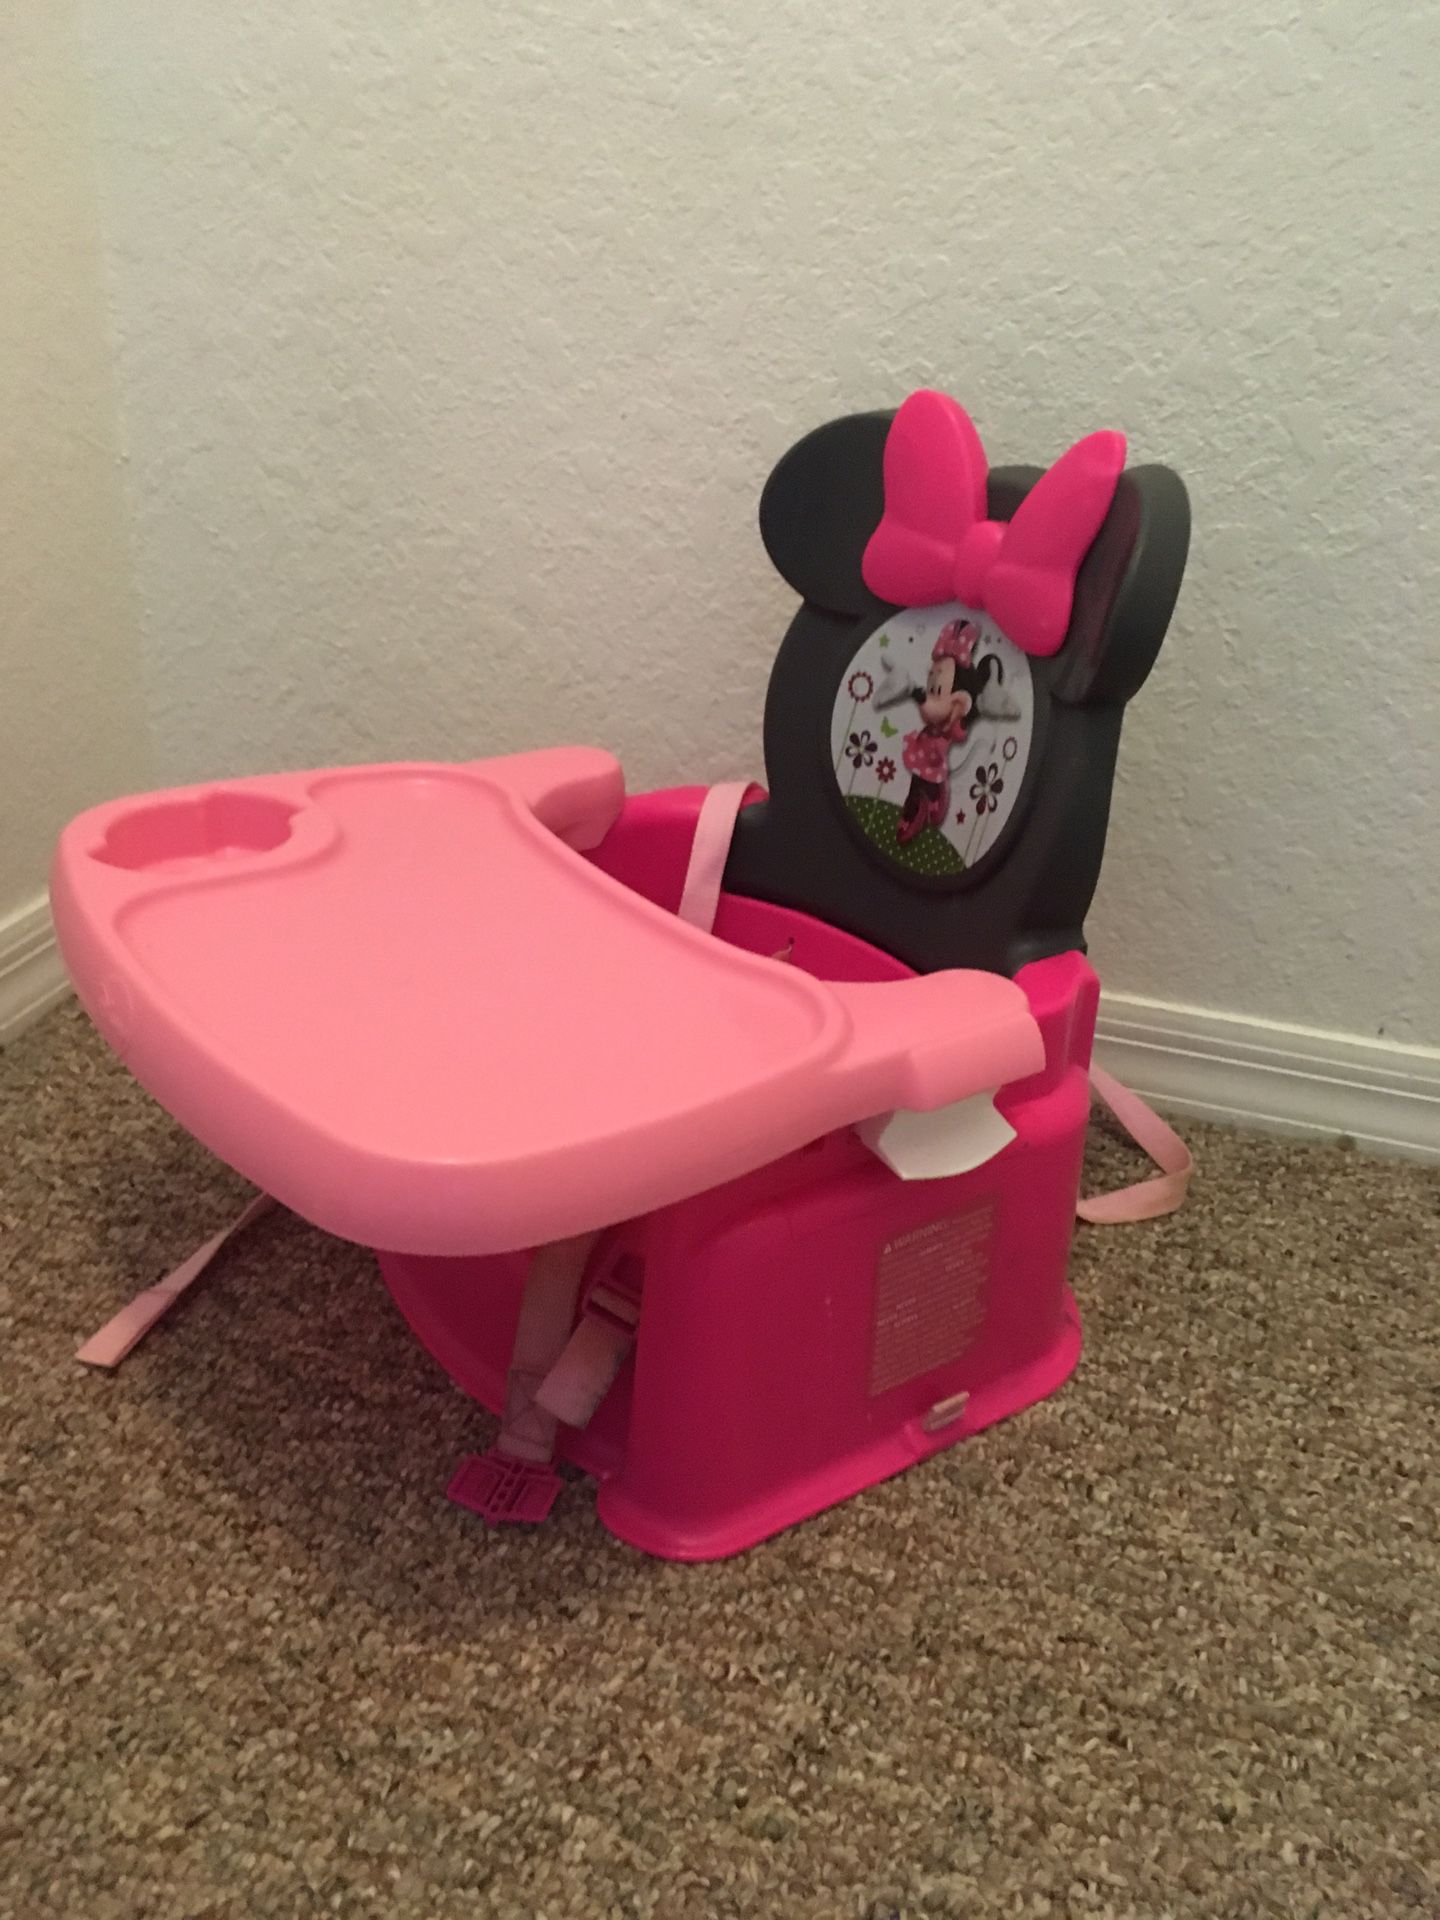 Minnie Mouse booster seat